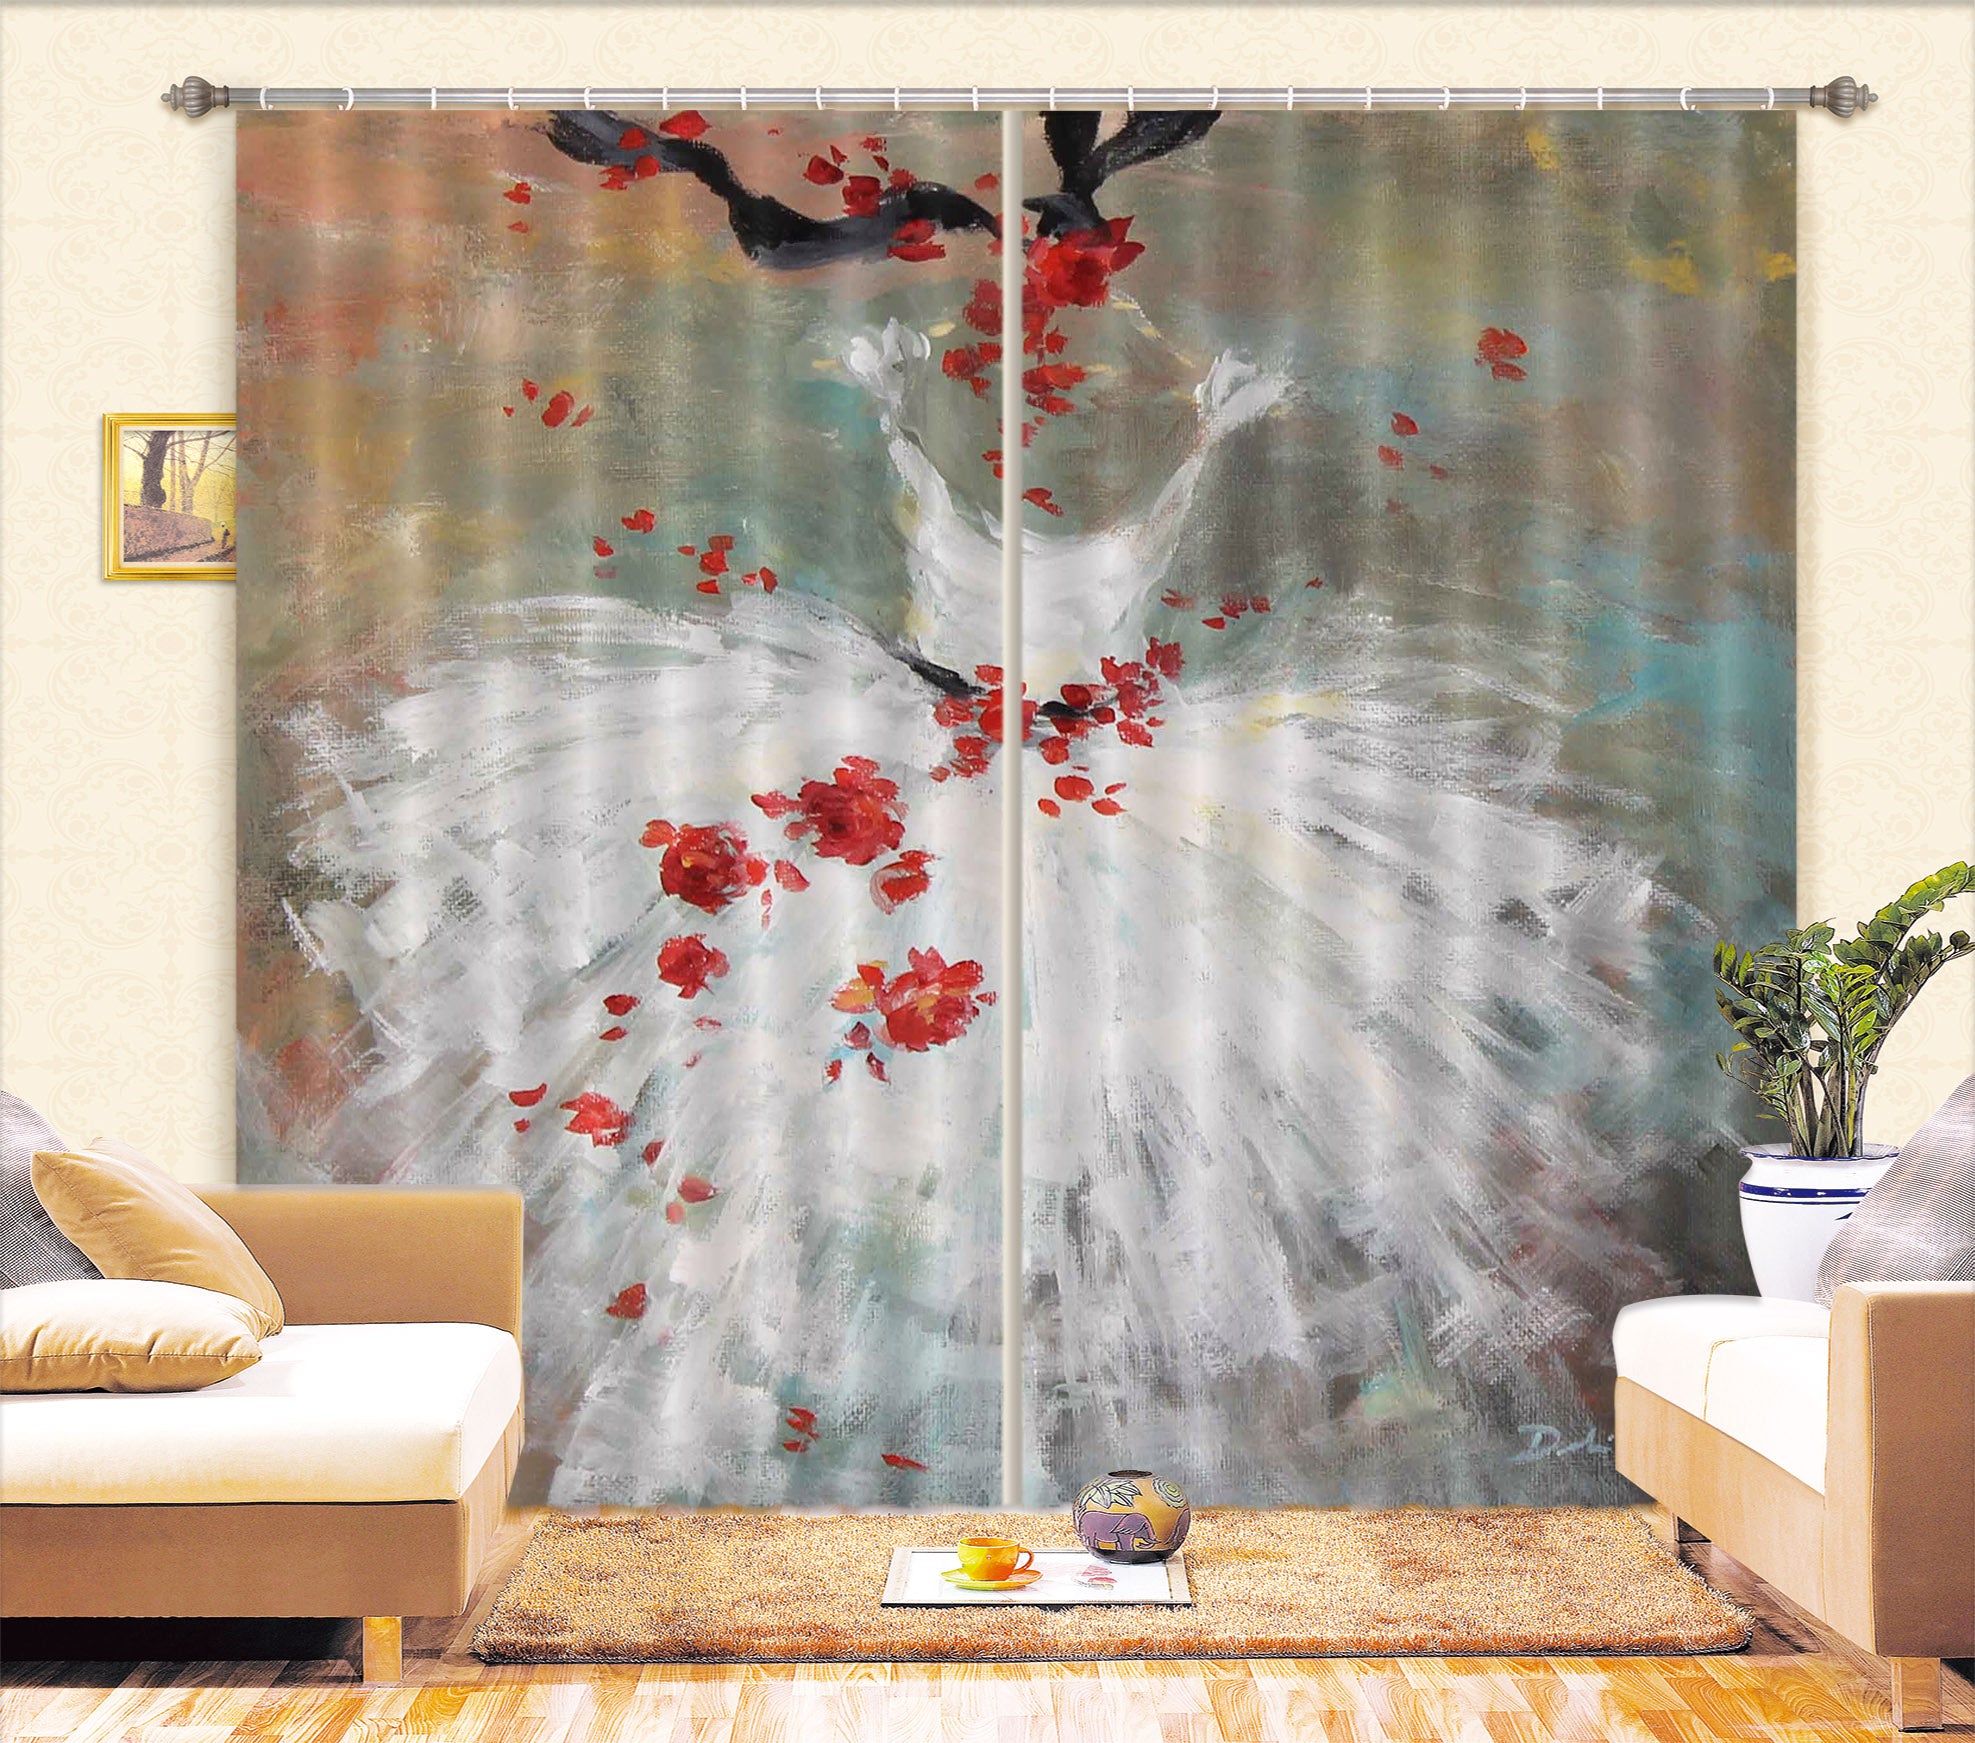 3D Skirt Red Petals 2193 Debi Coules Curtain Curtains Drapes